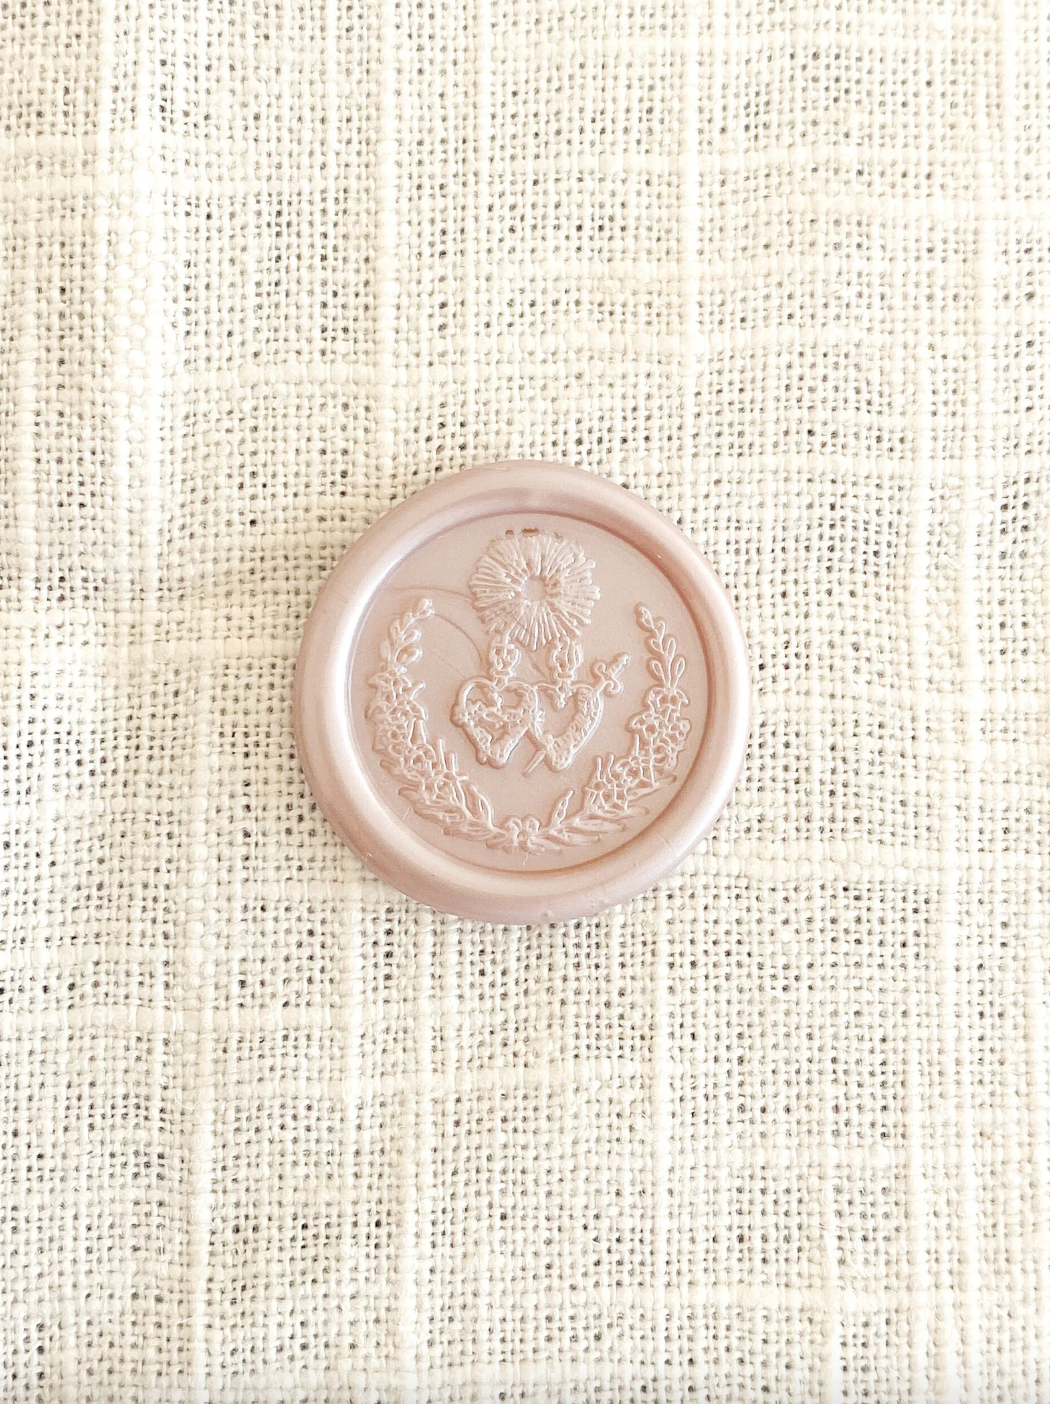 Catholic Wax Seal Stamps  Sacred Heart & Immaculate Heart Crest – Pieta  Paperie LLC